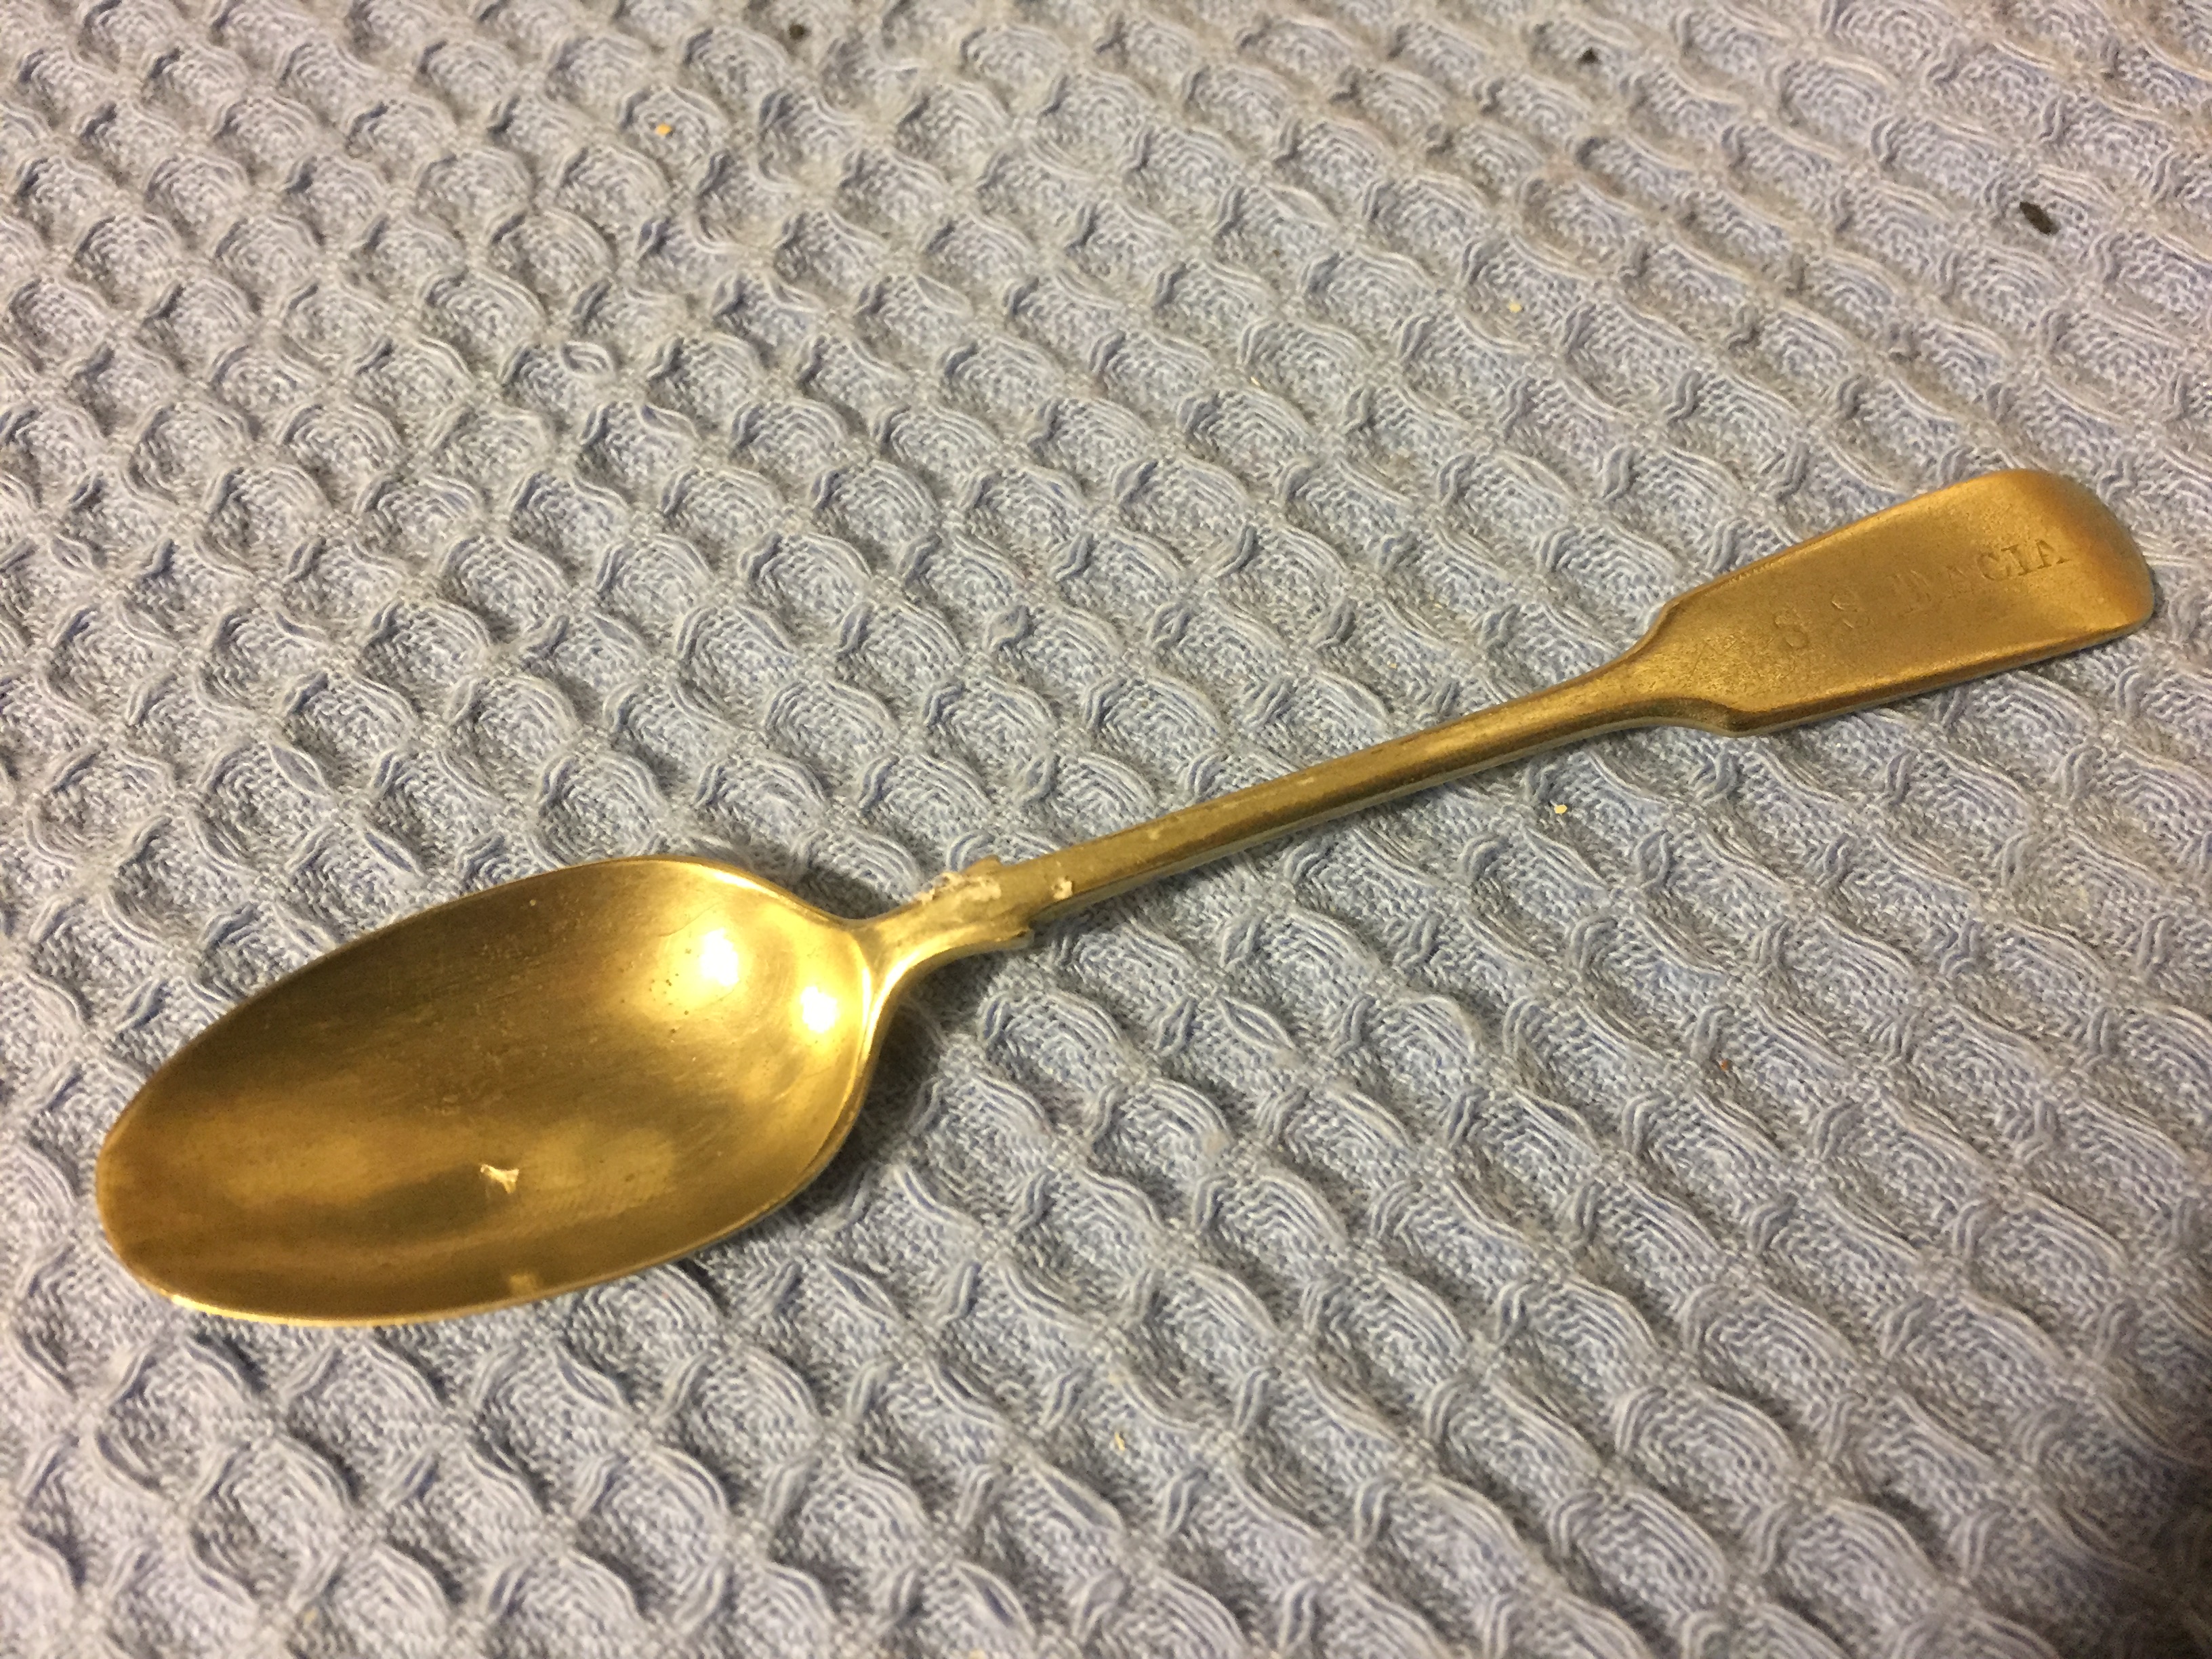 RARE FIND AS USED ON BOARD TEA SPOON FROM THE STEAMSHIP VESSEL THE SS DACIA